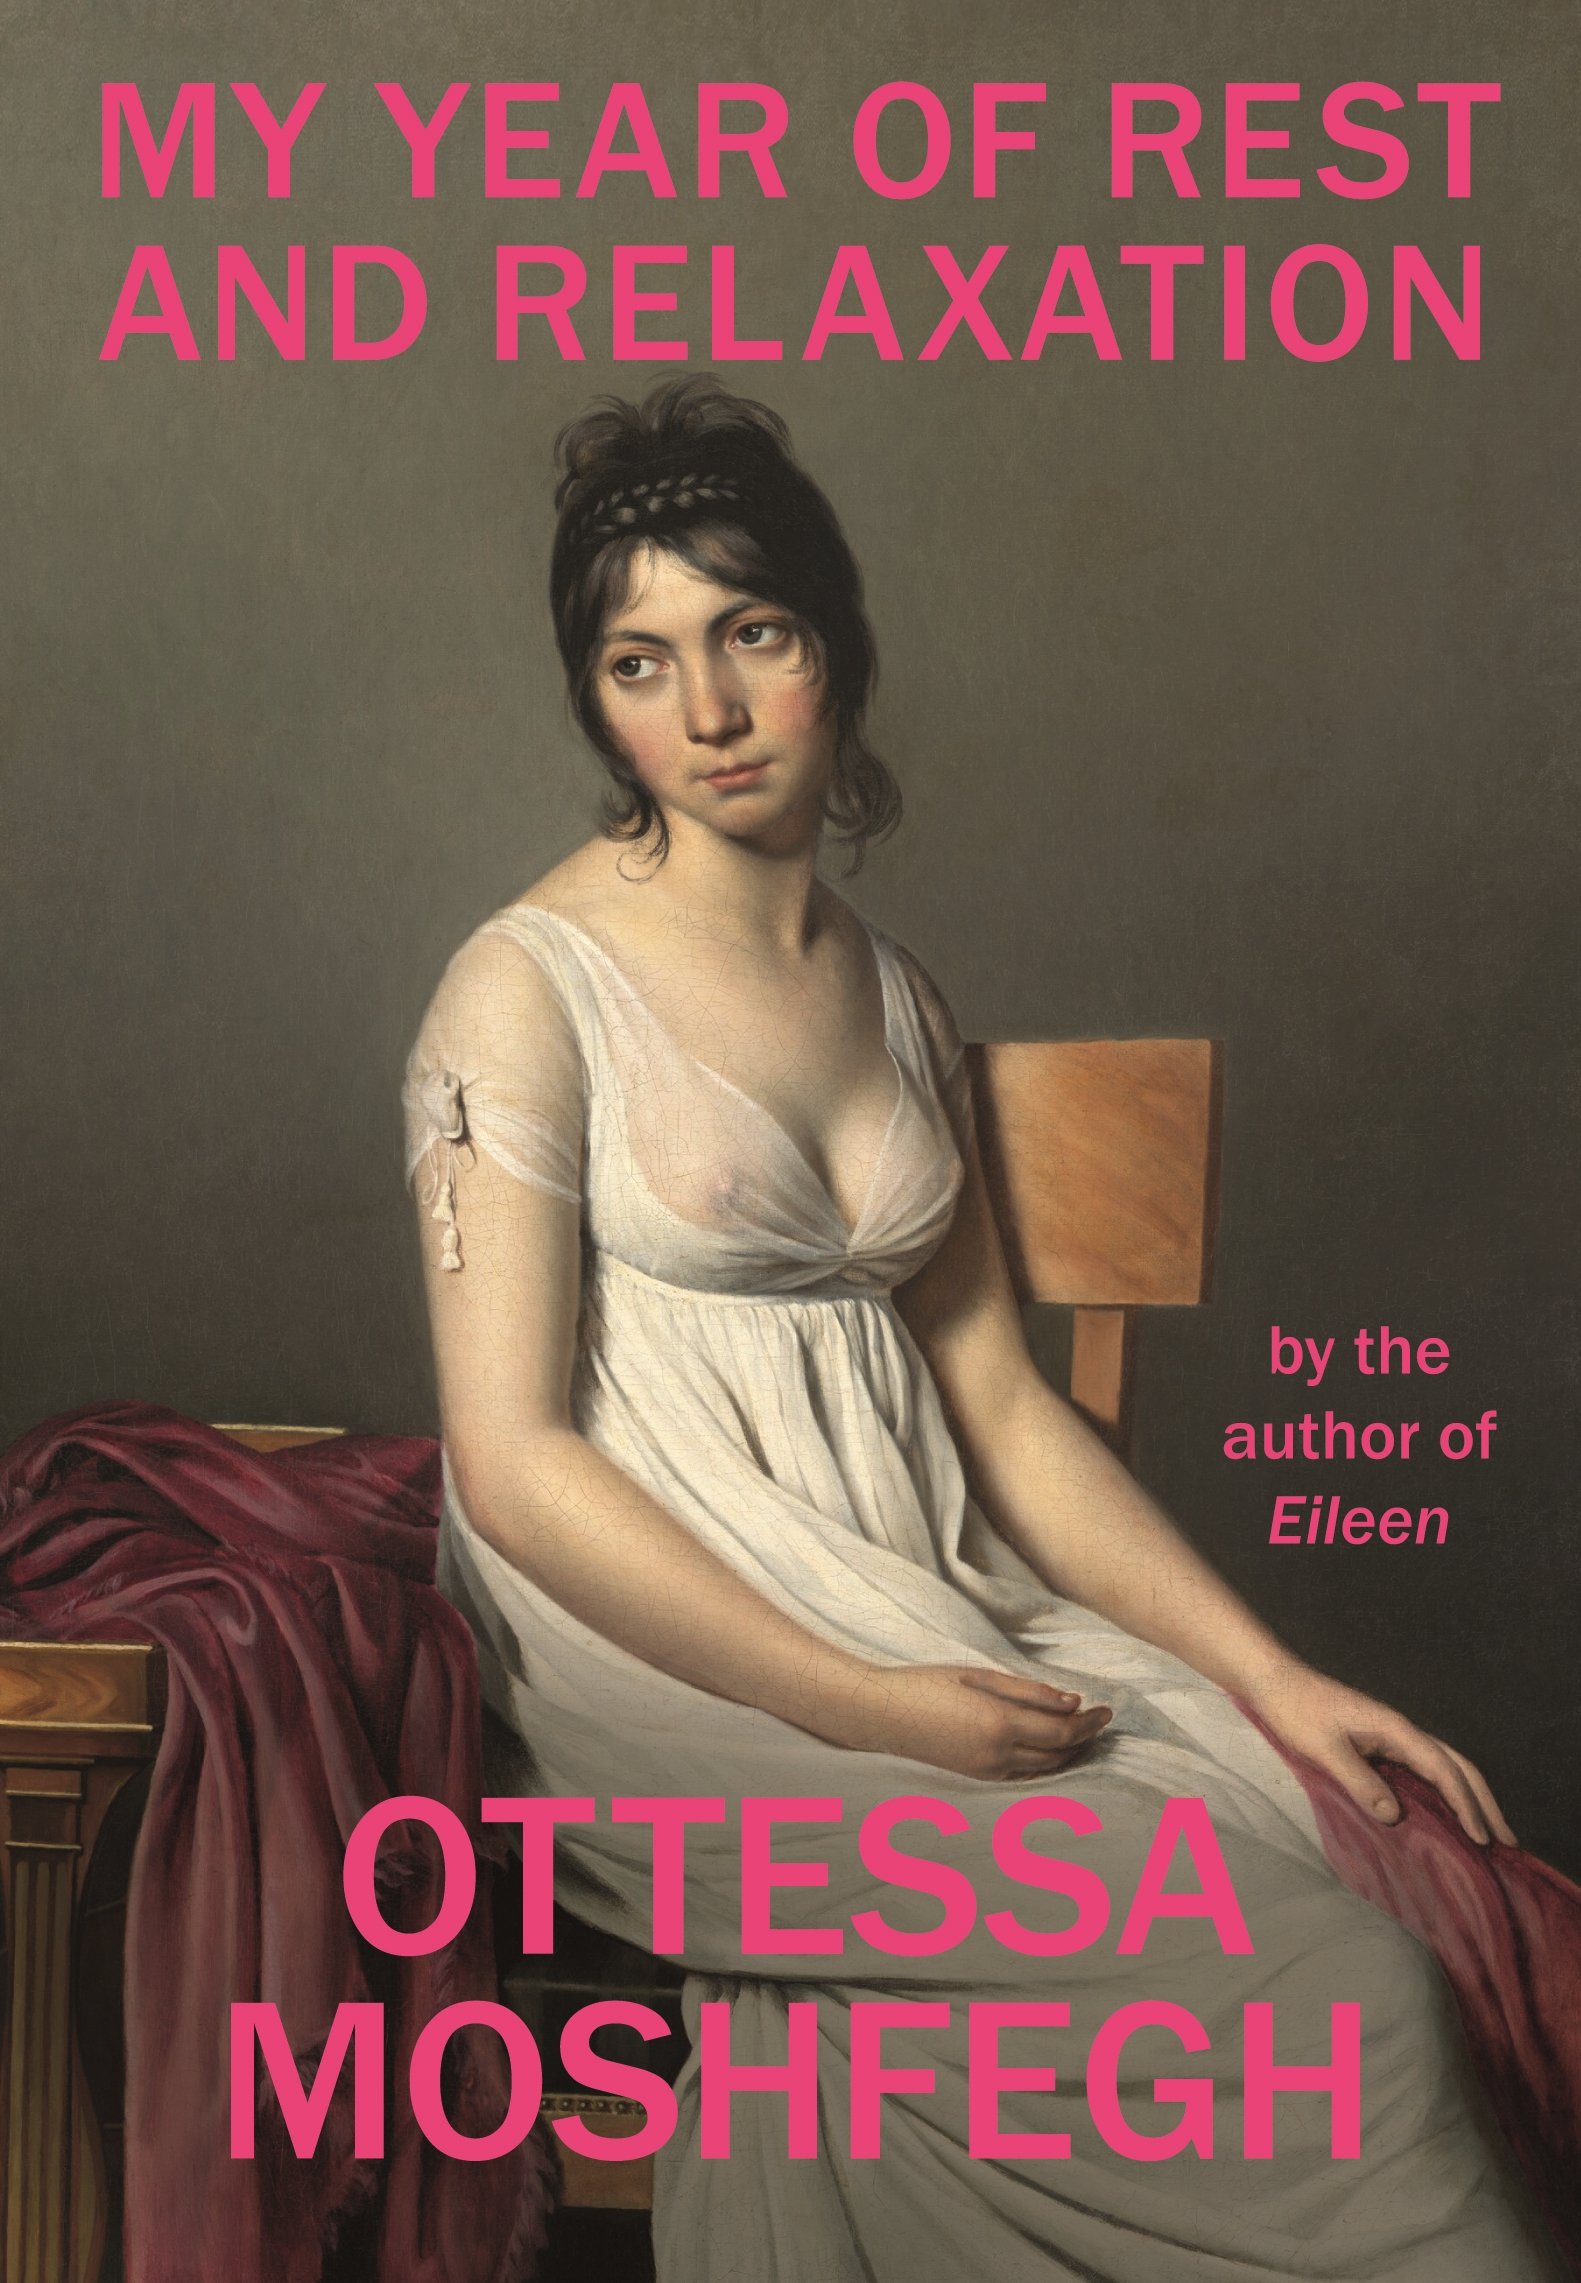 'My Year of Rest and Relaxation' by Ottessa Moshfegh